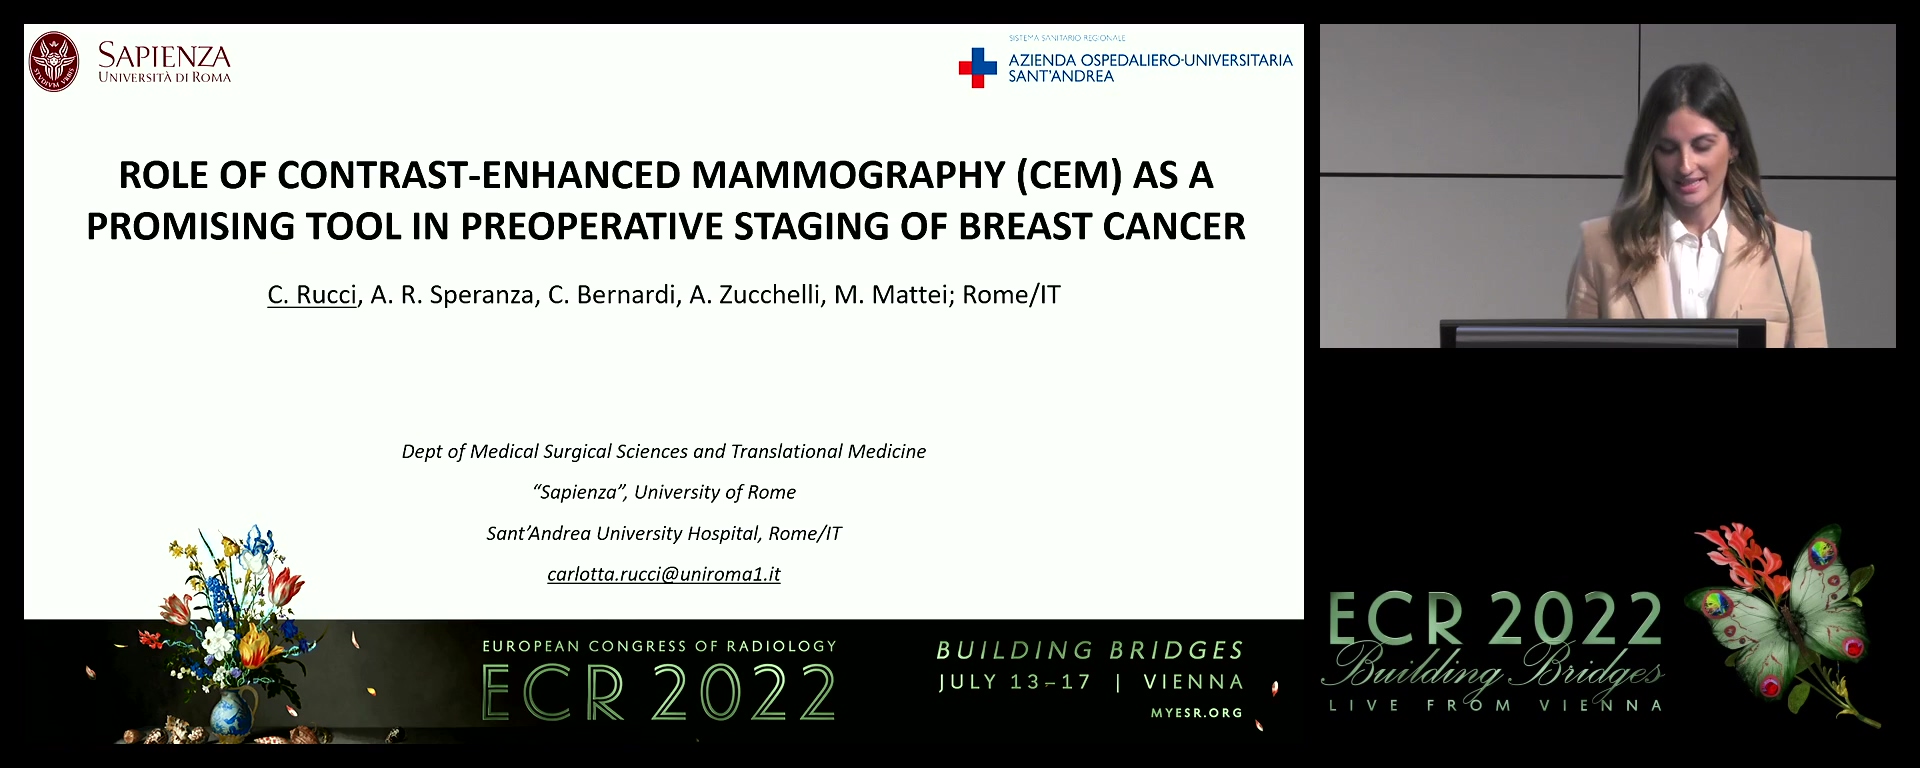 Role of contrast-enhanced mammography (CEM) as a promising tool in preoperative staging of breast cancer - Carlotta Rucci, Rome / IT